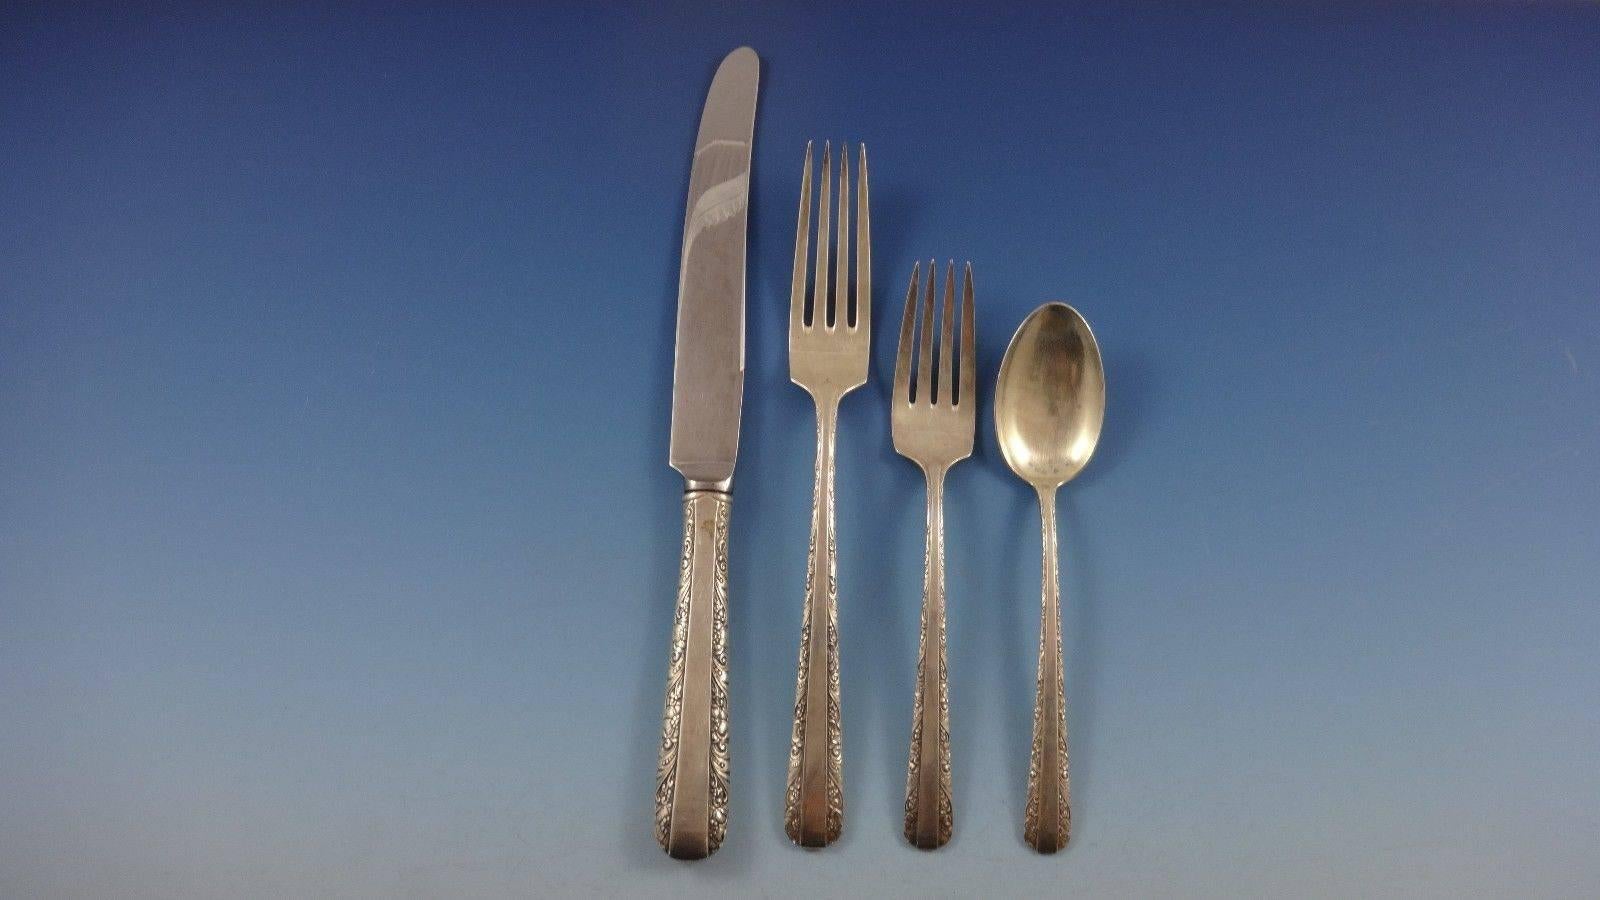 Candlelight by Towle Sterling Silver Flatware Set 8 Service 80 Pcs Dinner Size In Excellent Condition For Sale In Big Bend, WI